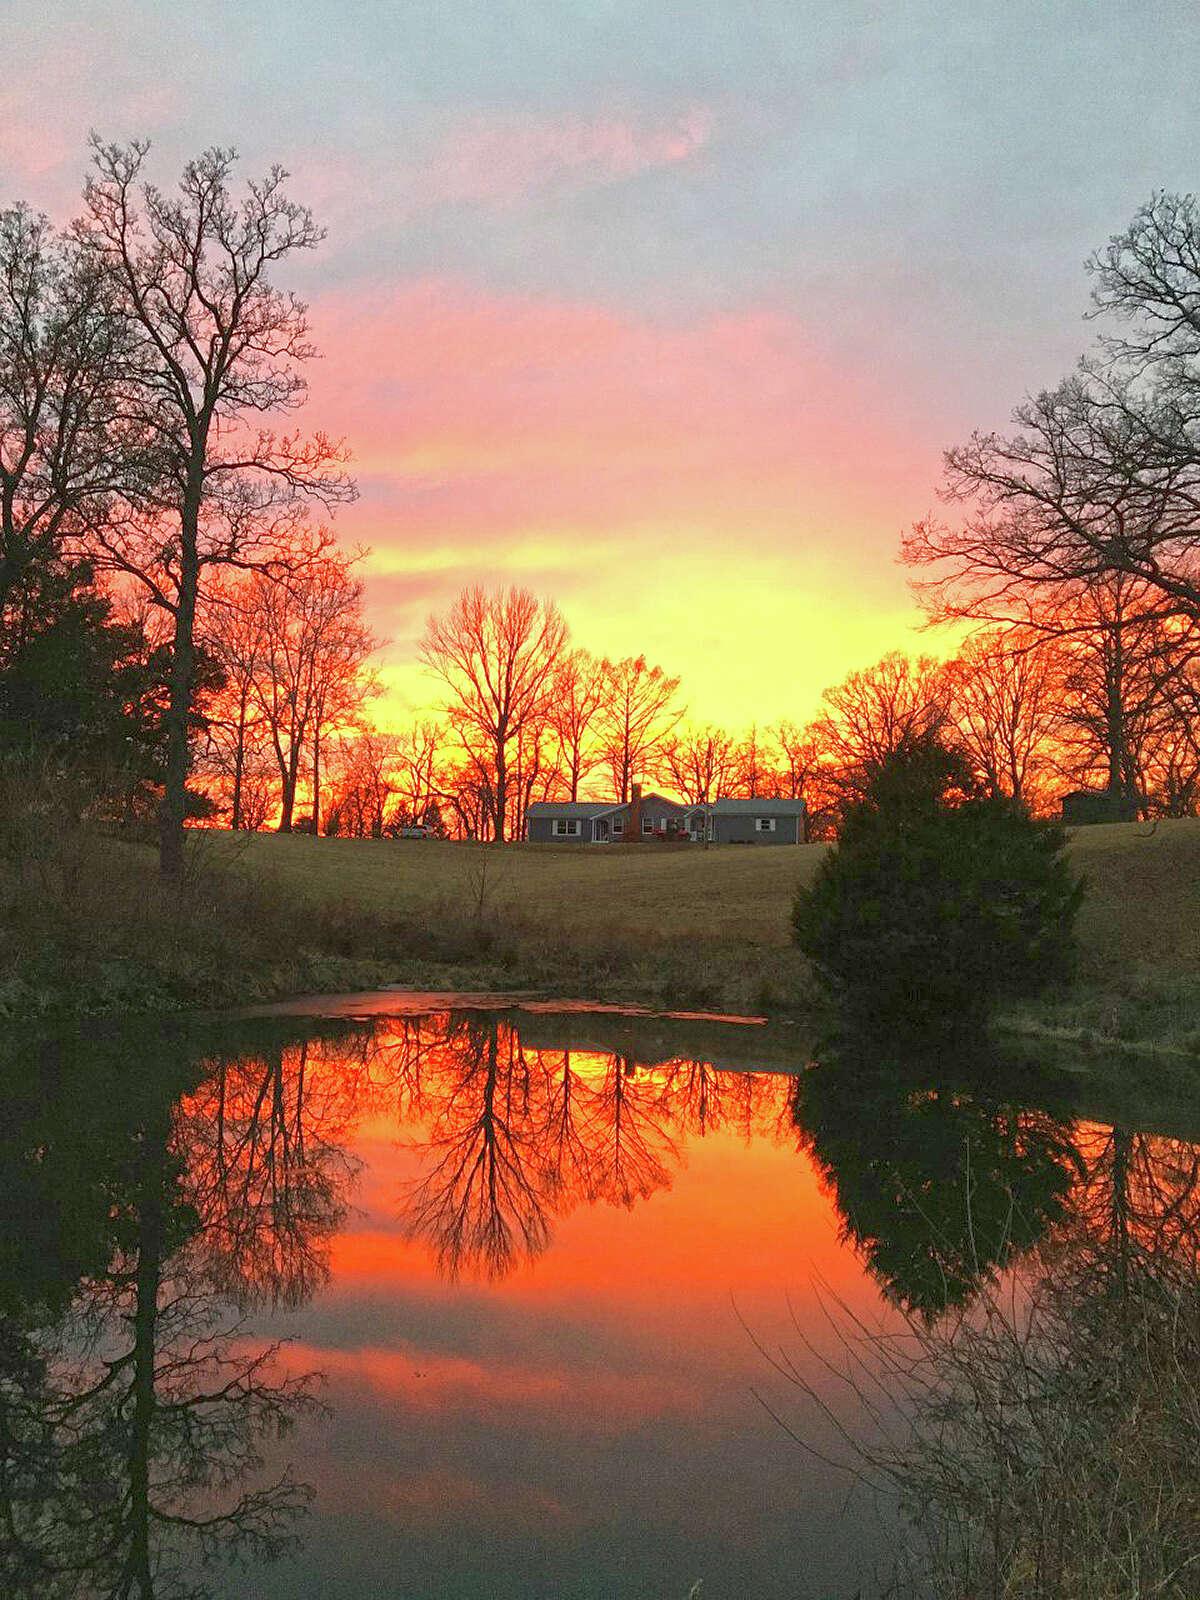 The vibrant colors of a winter sunset are reflected in a pond in Morgan County.